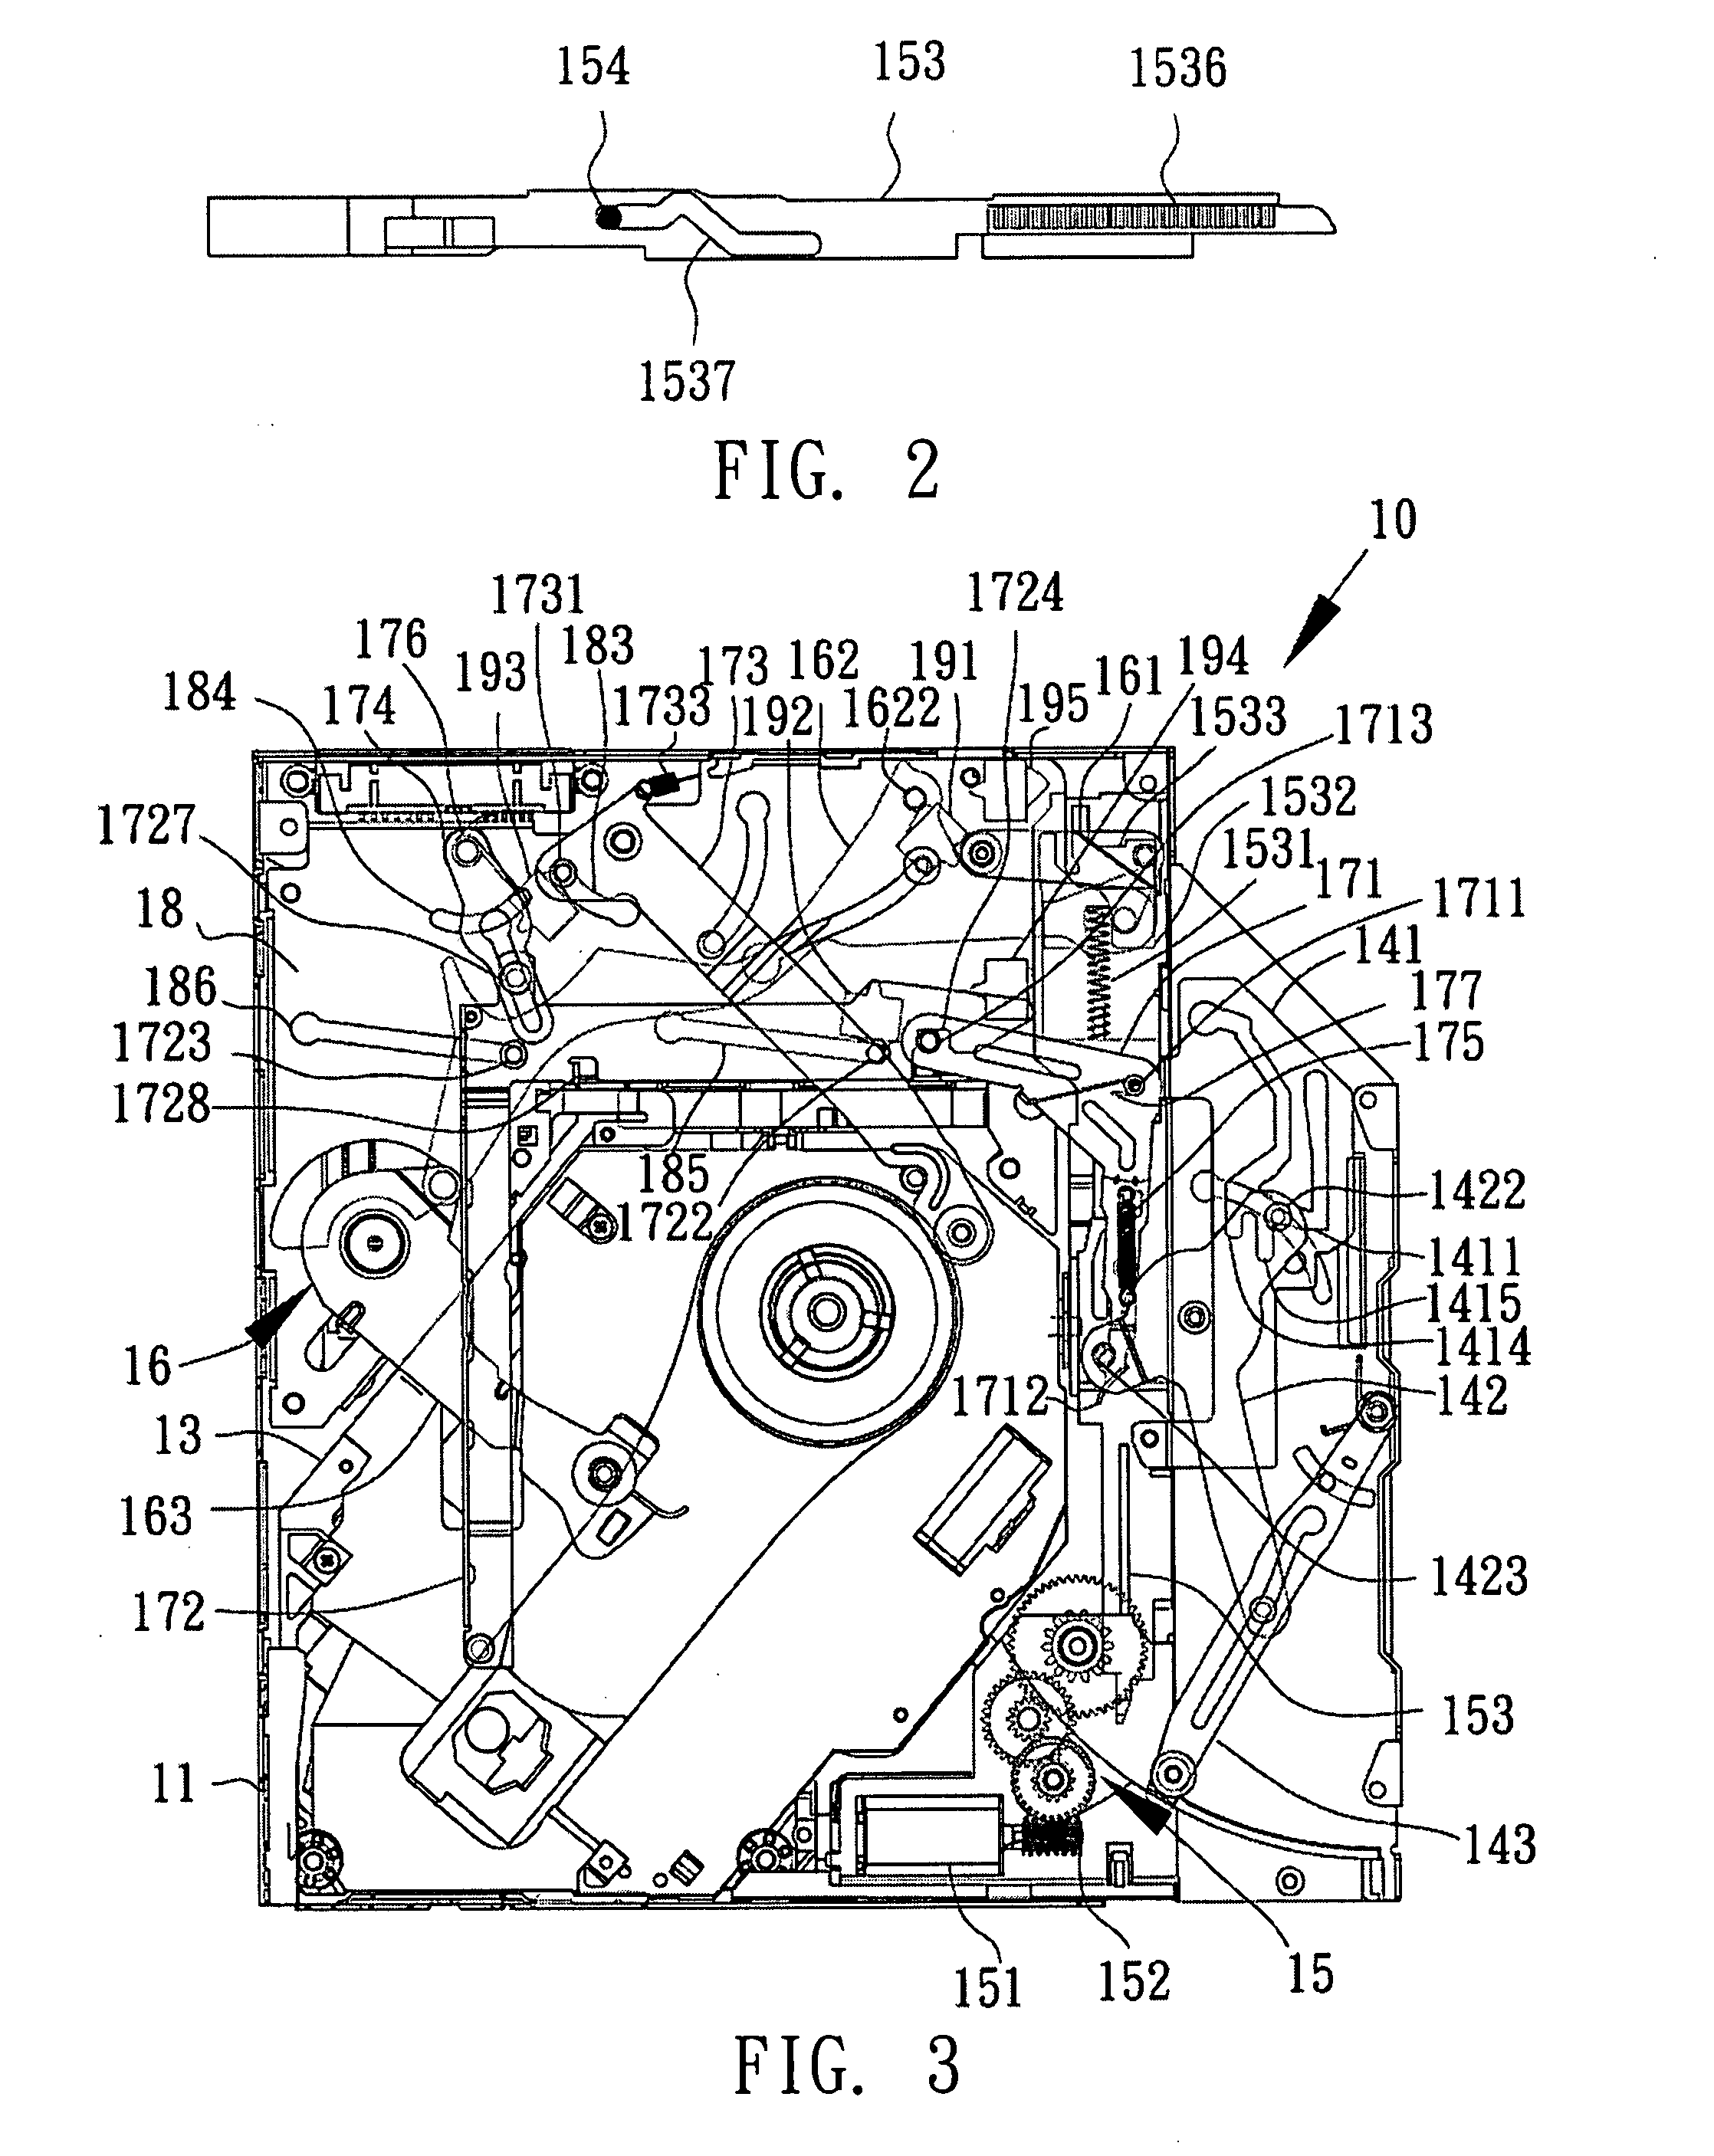 Slot-in disk drive device and method